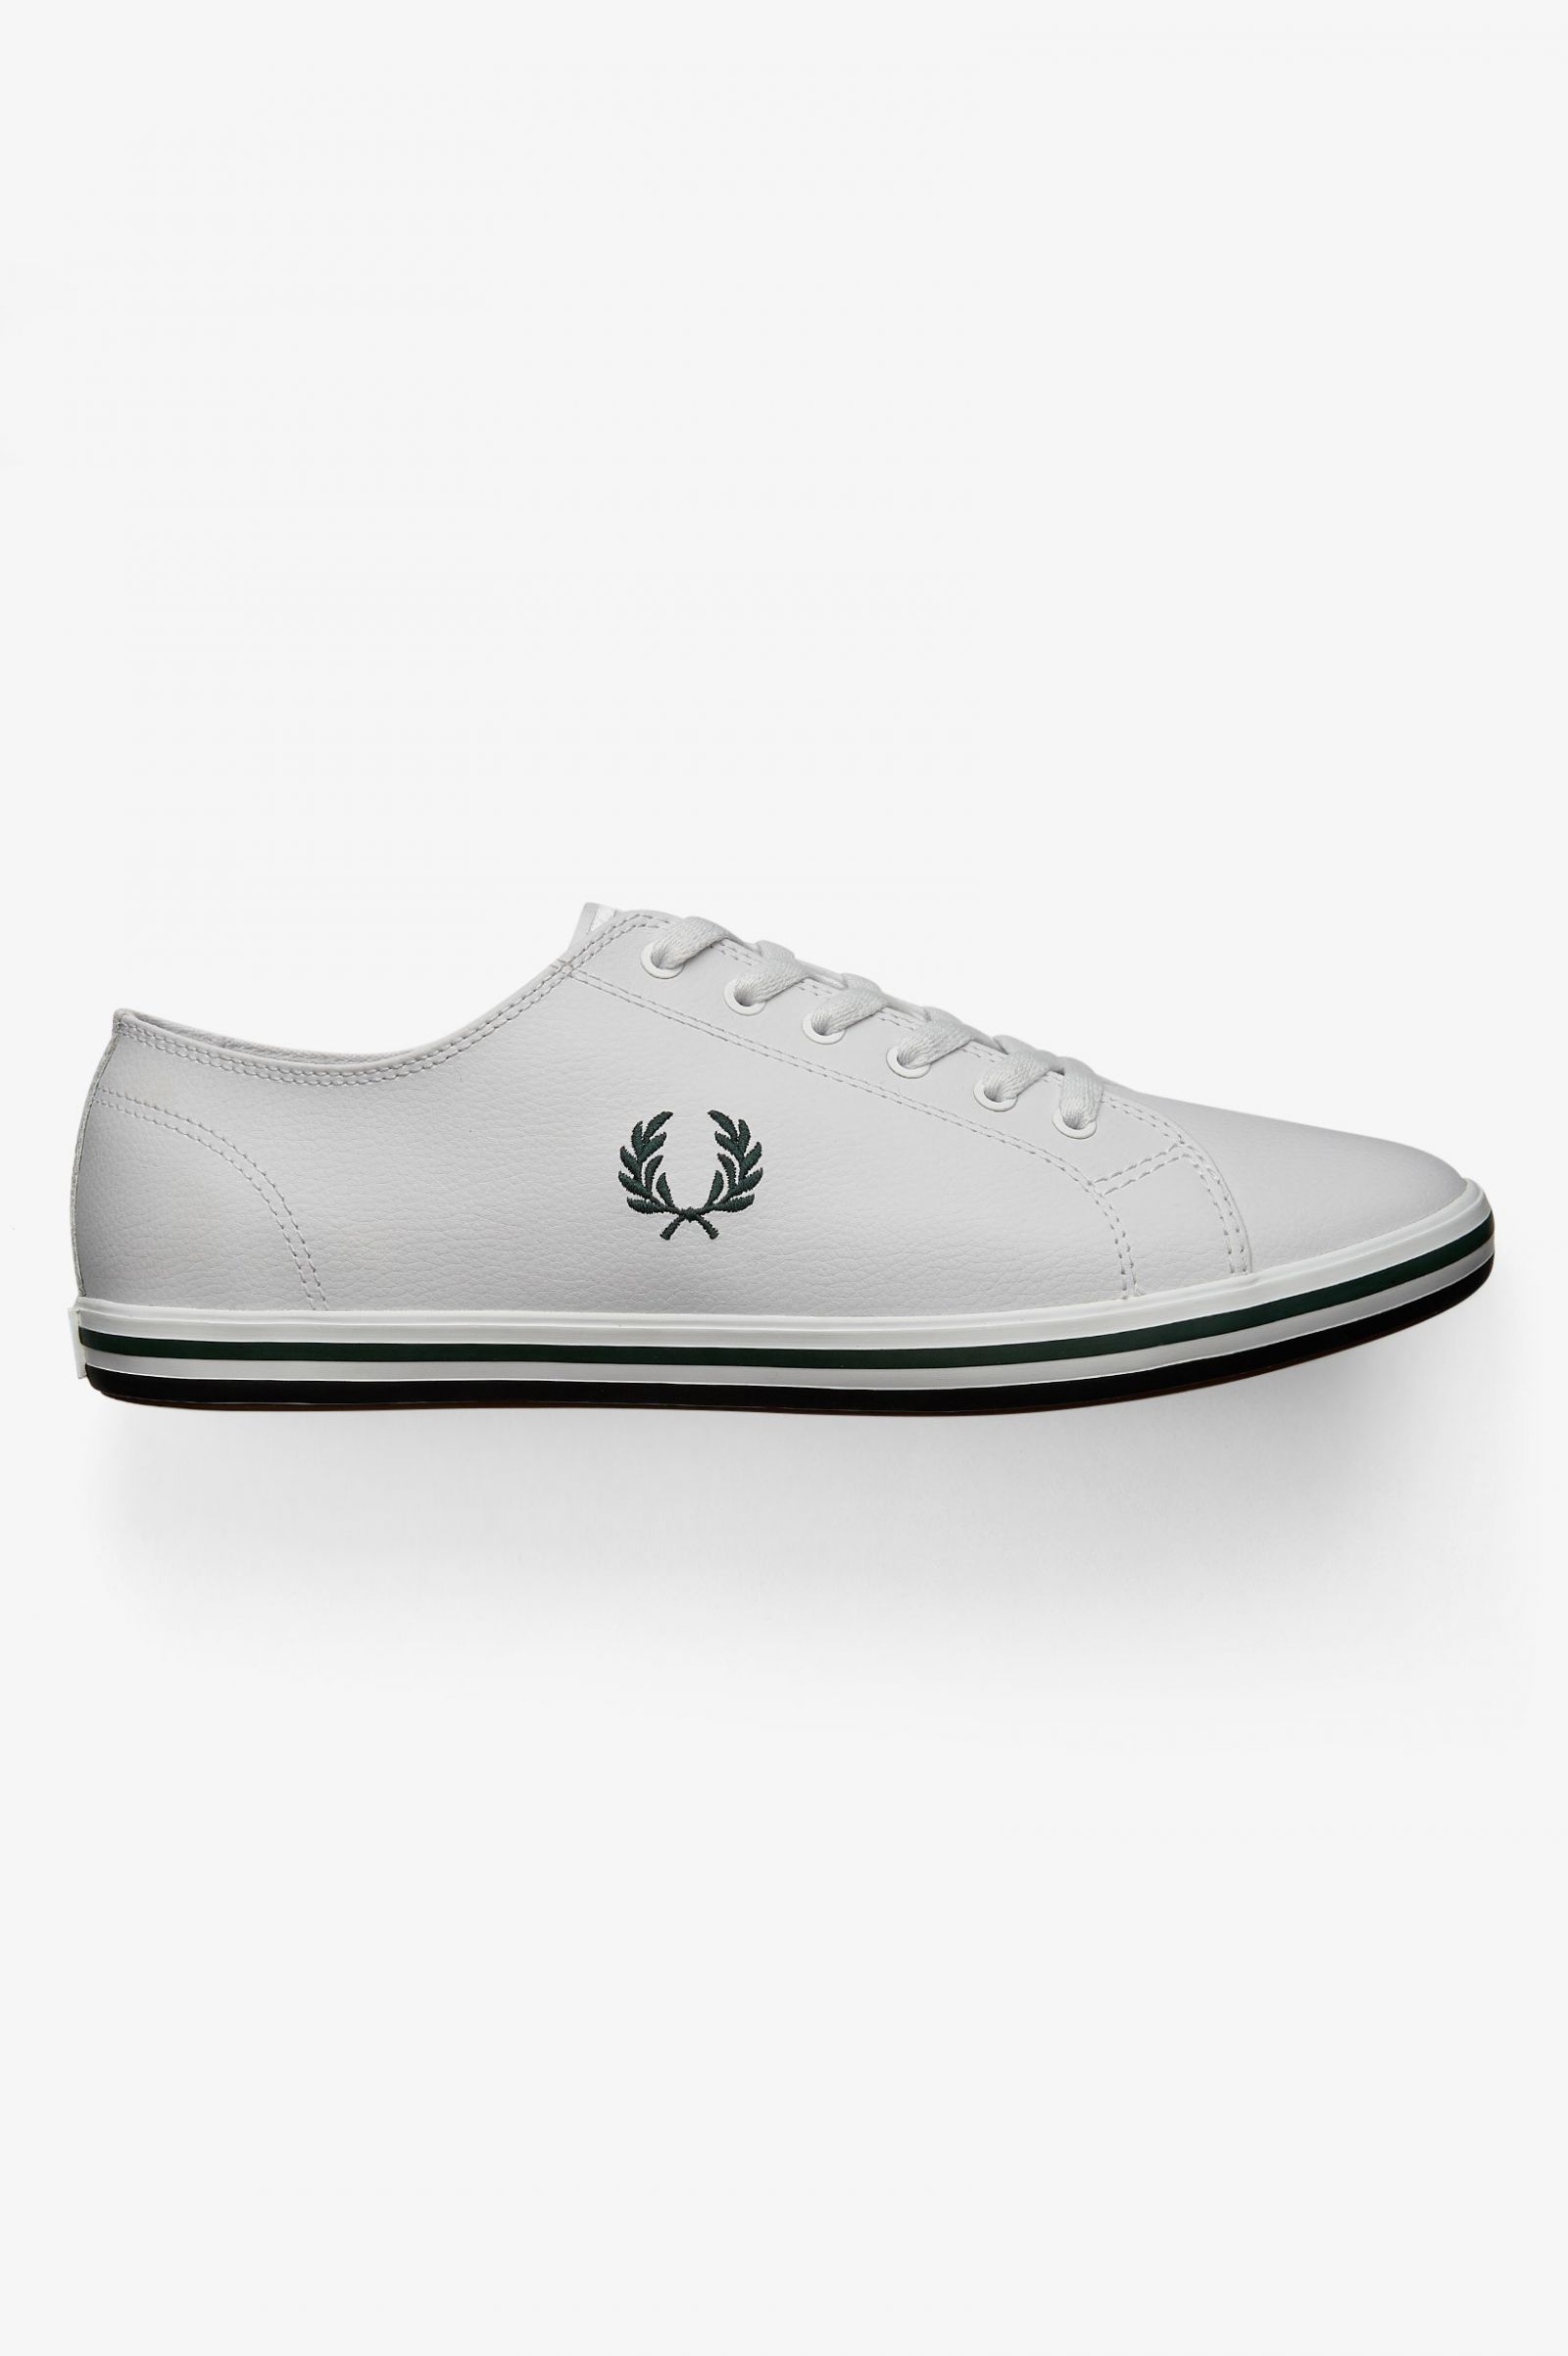 fred perry kingston leather black